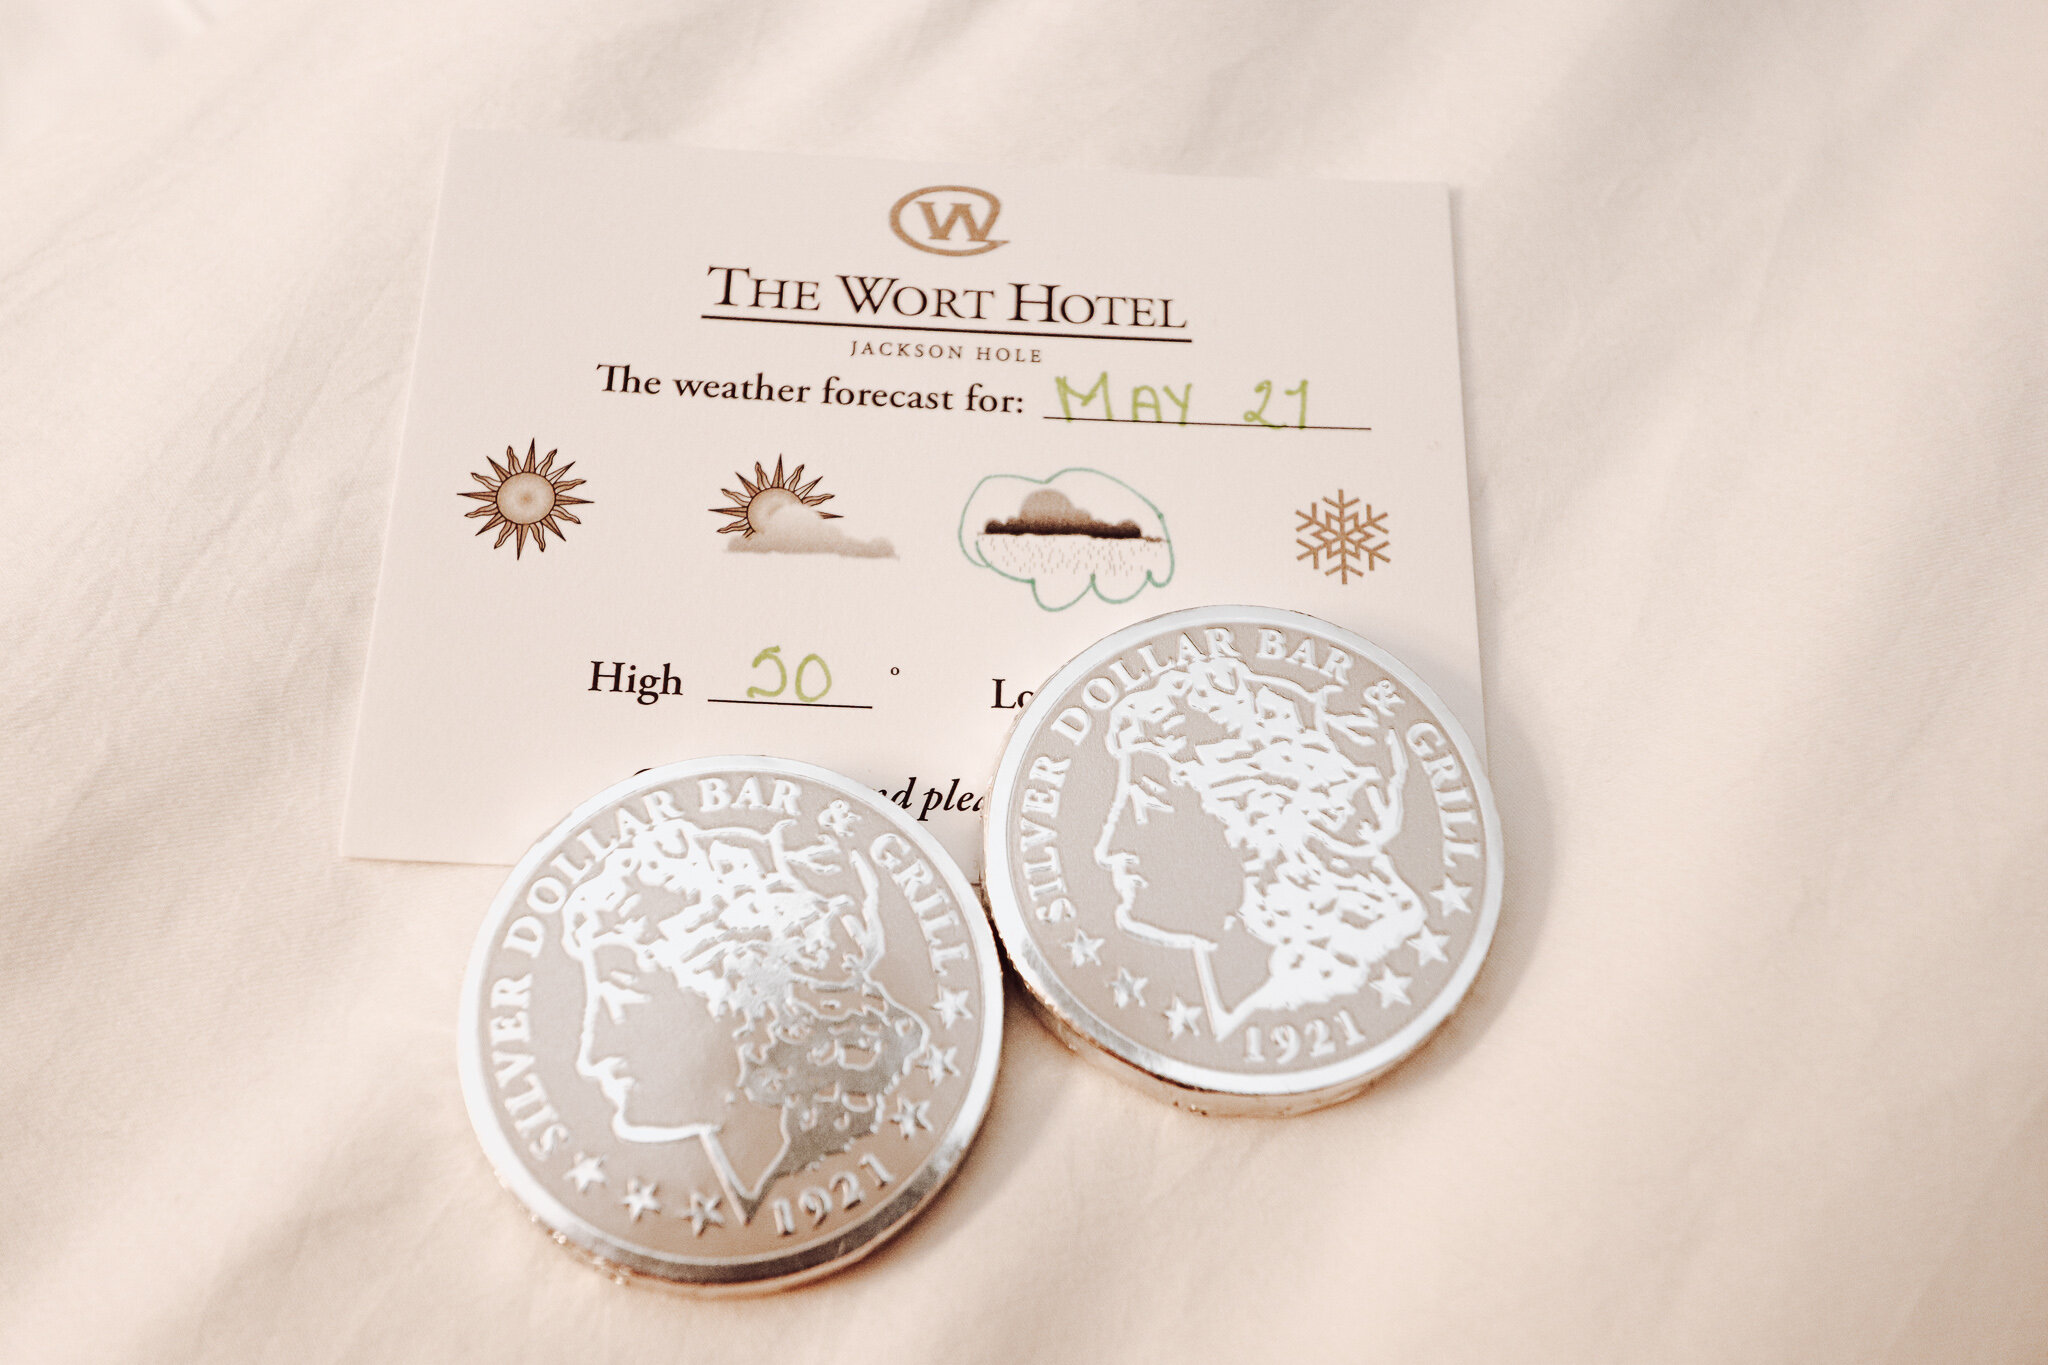  Silver Dollar chocolates are left on the bed with a daily weather report. 